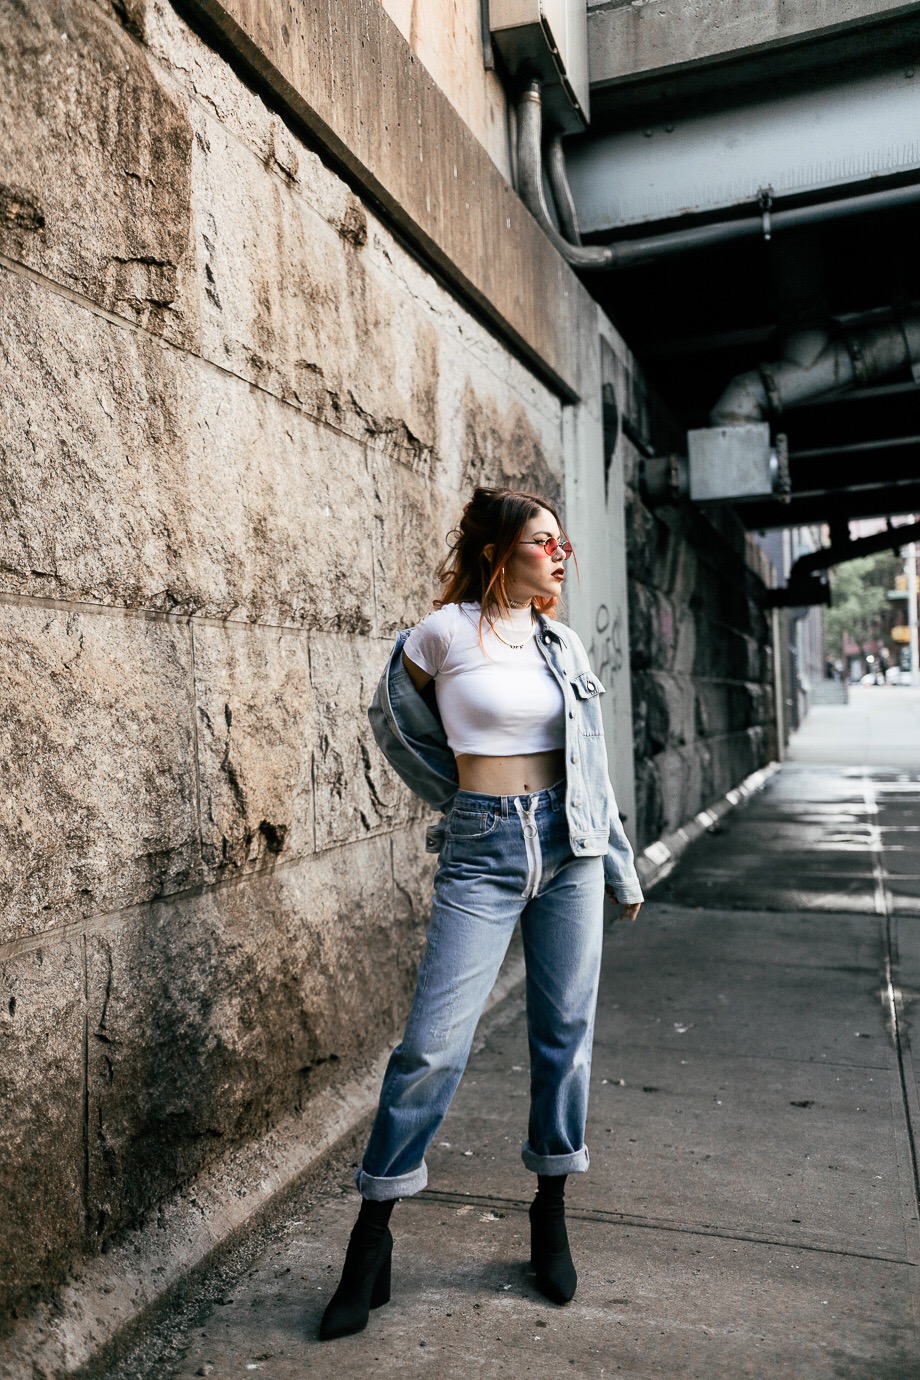 Luanna wearing Off White jeans and MM6 distressed denim jacket with Yeezy boots